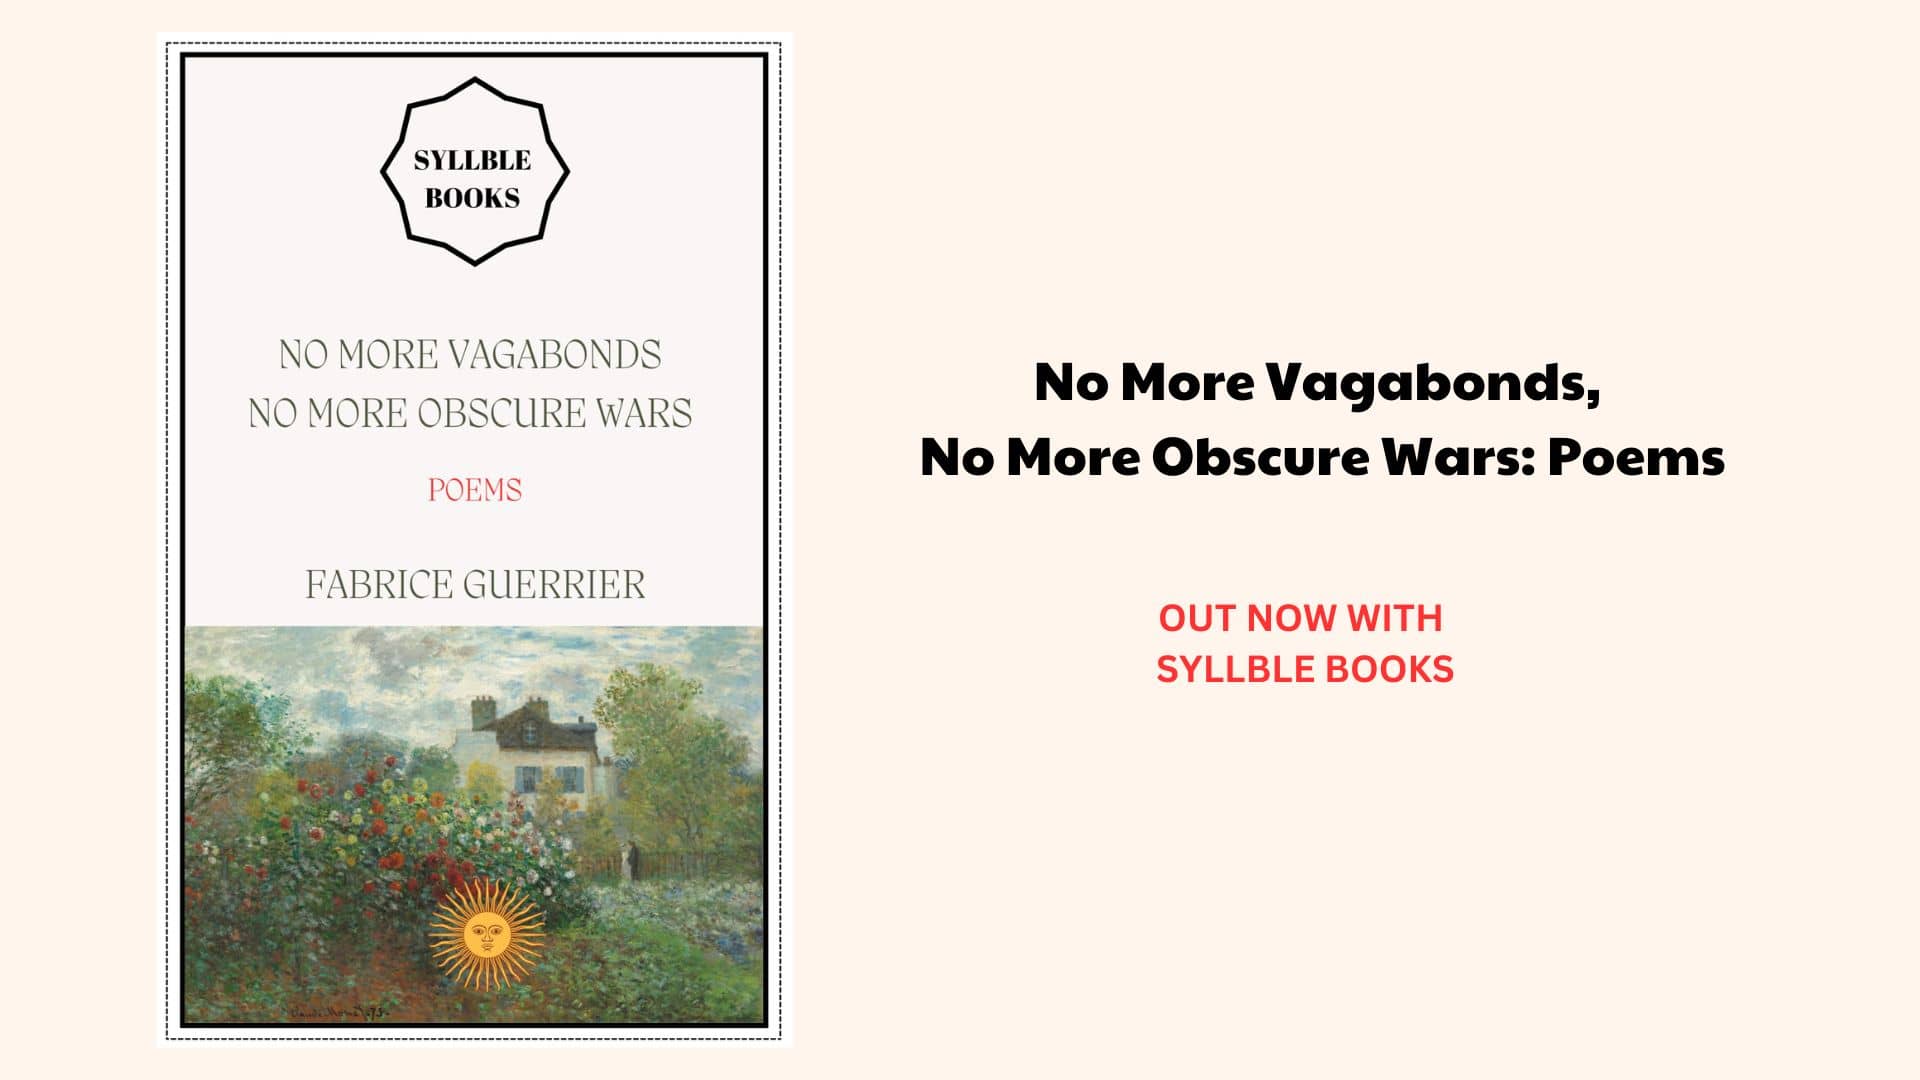 Founder Fabrice Guerrier Unveils His Second Poetry Collection, “No More Vagabonds, No More Obscure Wars”